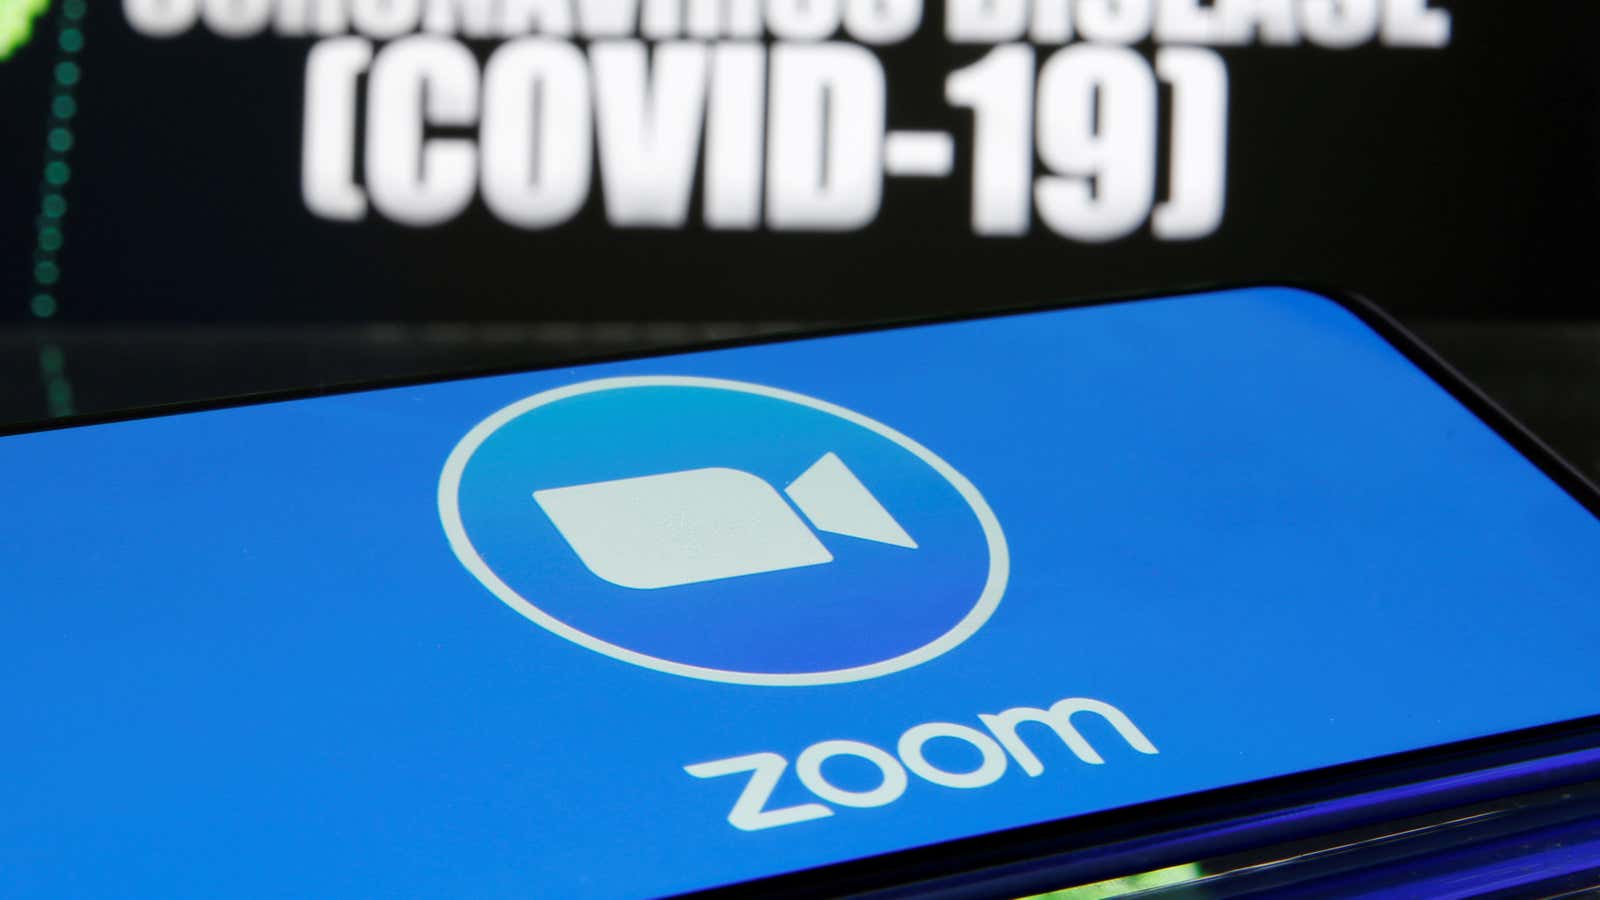 Zoom has become known for security issues, but every video-conferencing service has its drawbacks.